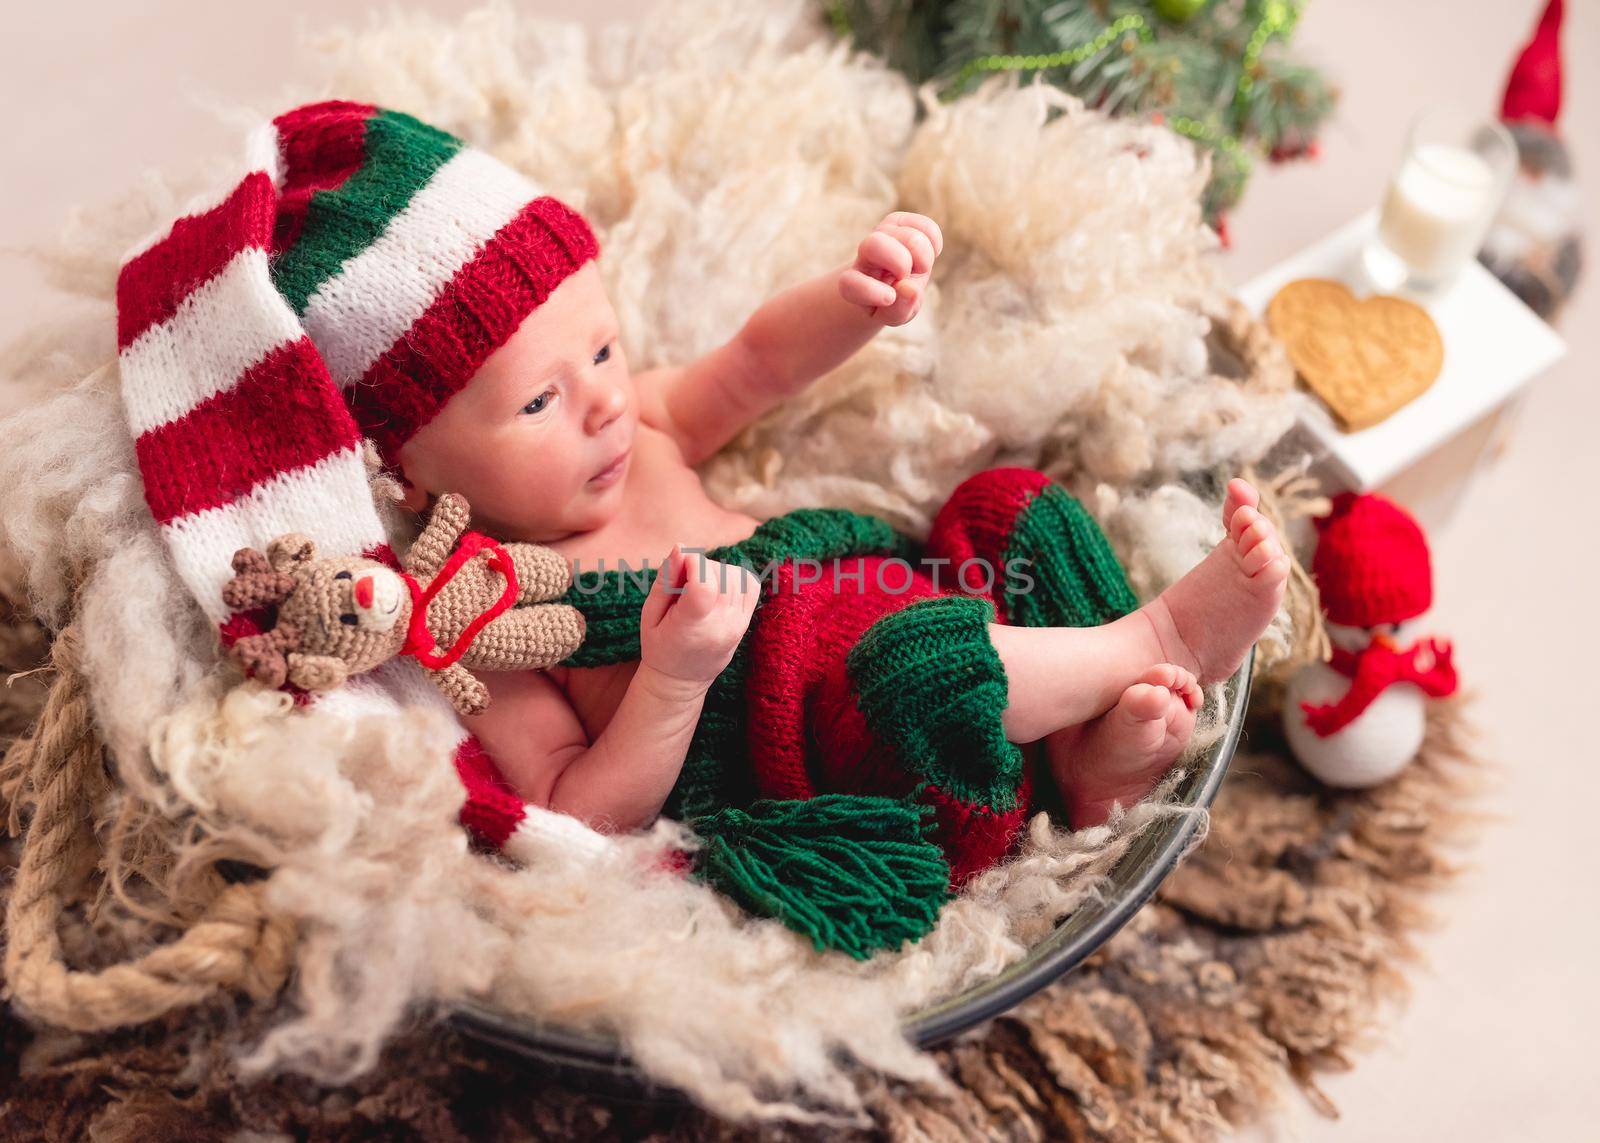 Top view of baby in knitted suit with new year decortions